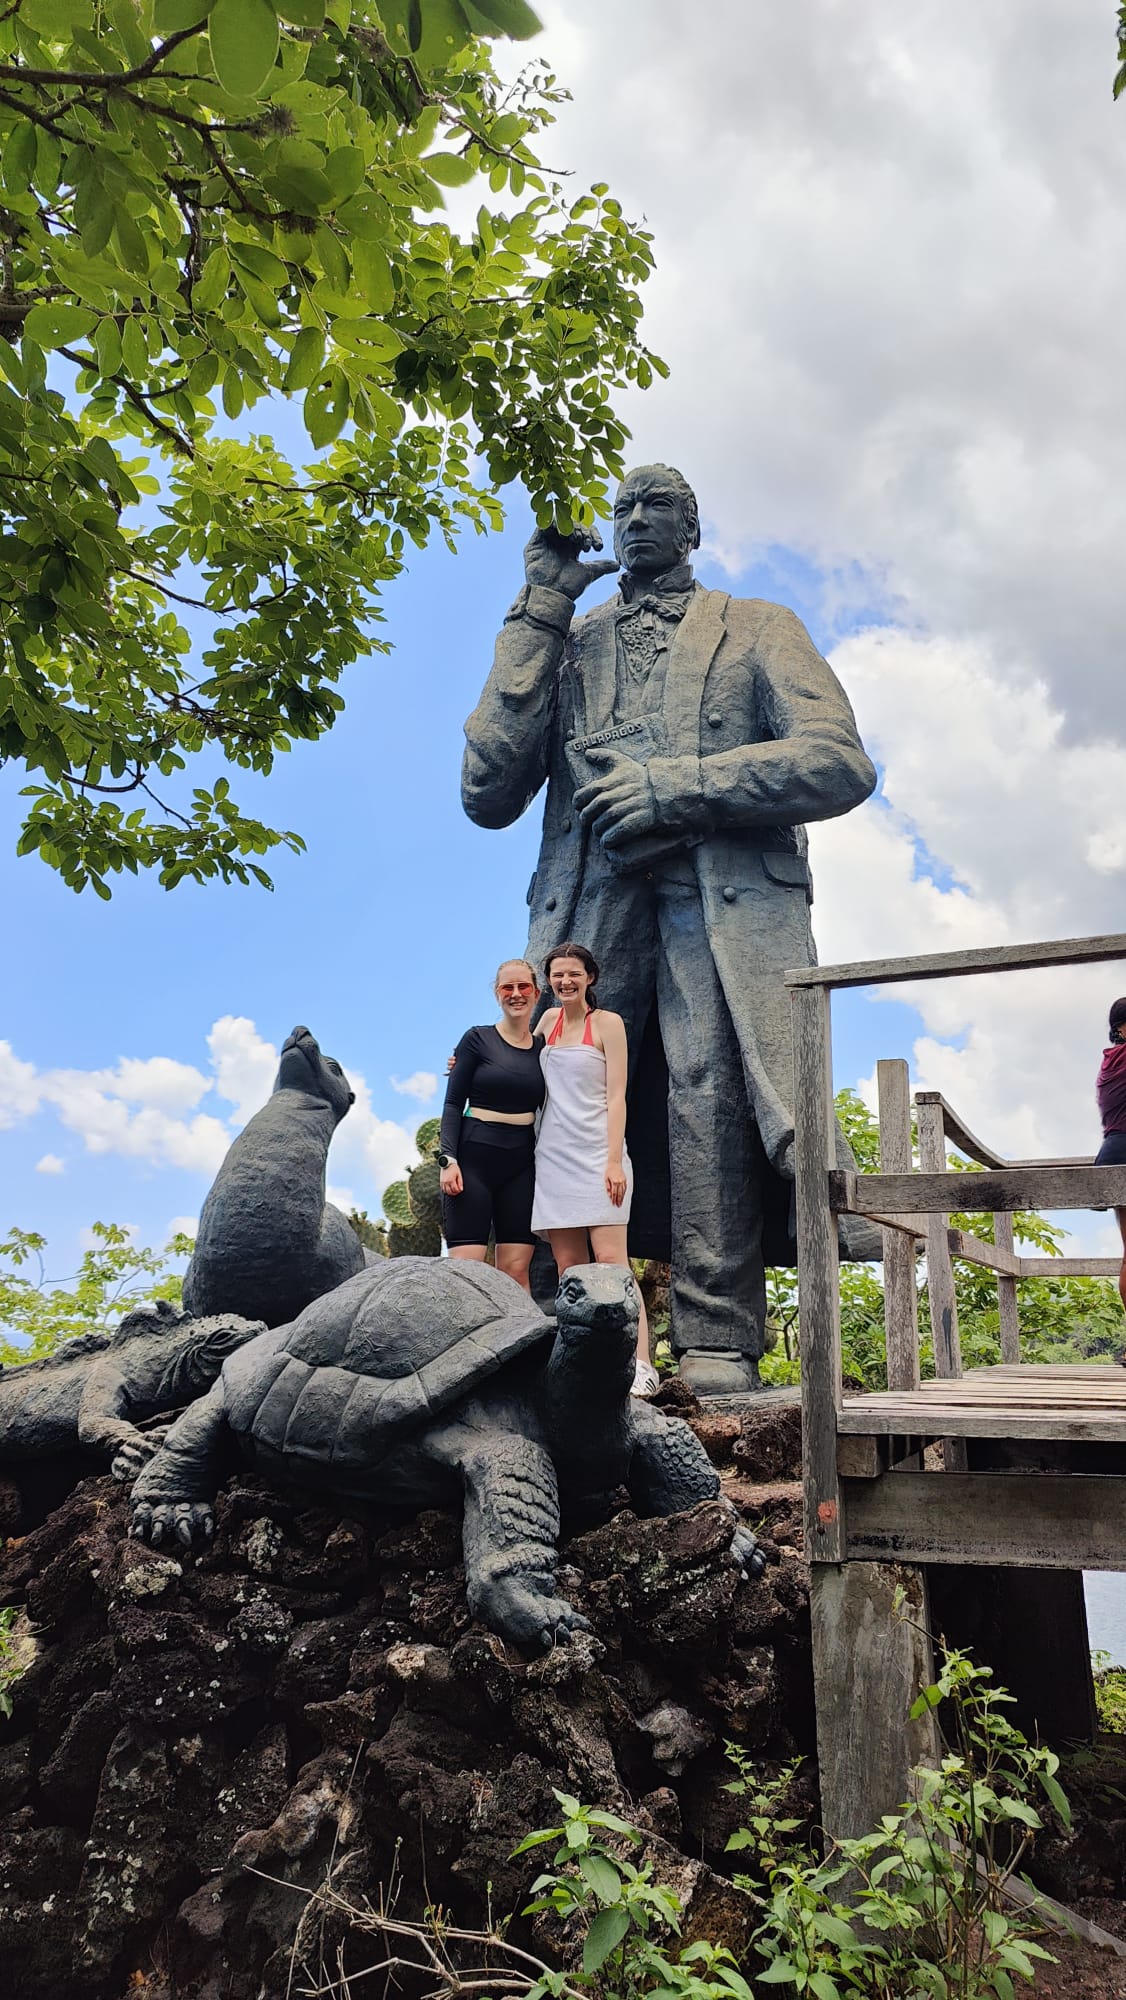 Pictured is my friend Leena and I posing with three statues: one of Charles Darwin, one of a sea lion, and one of a tortoise. We are both smiling with a nice blue sky above us.